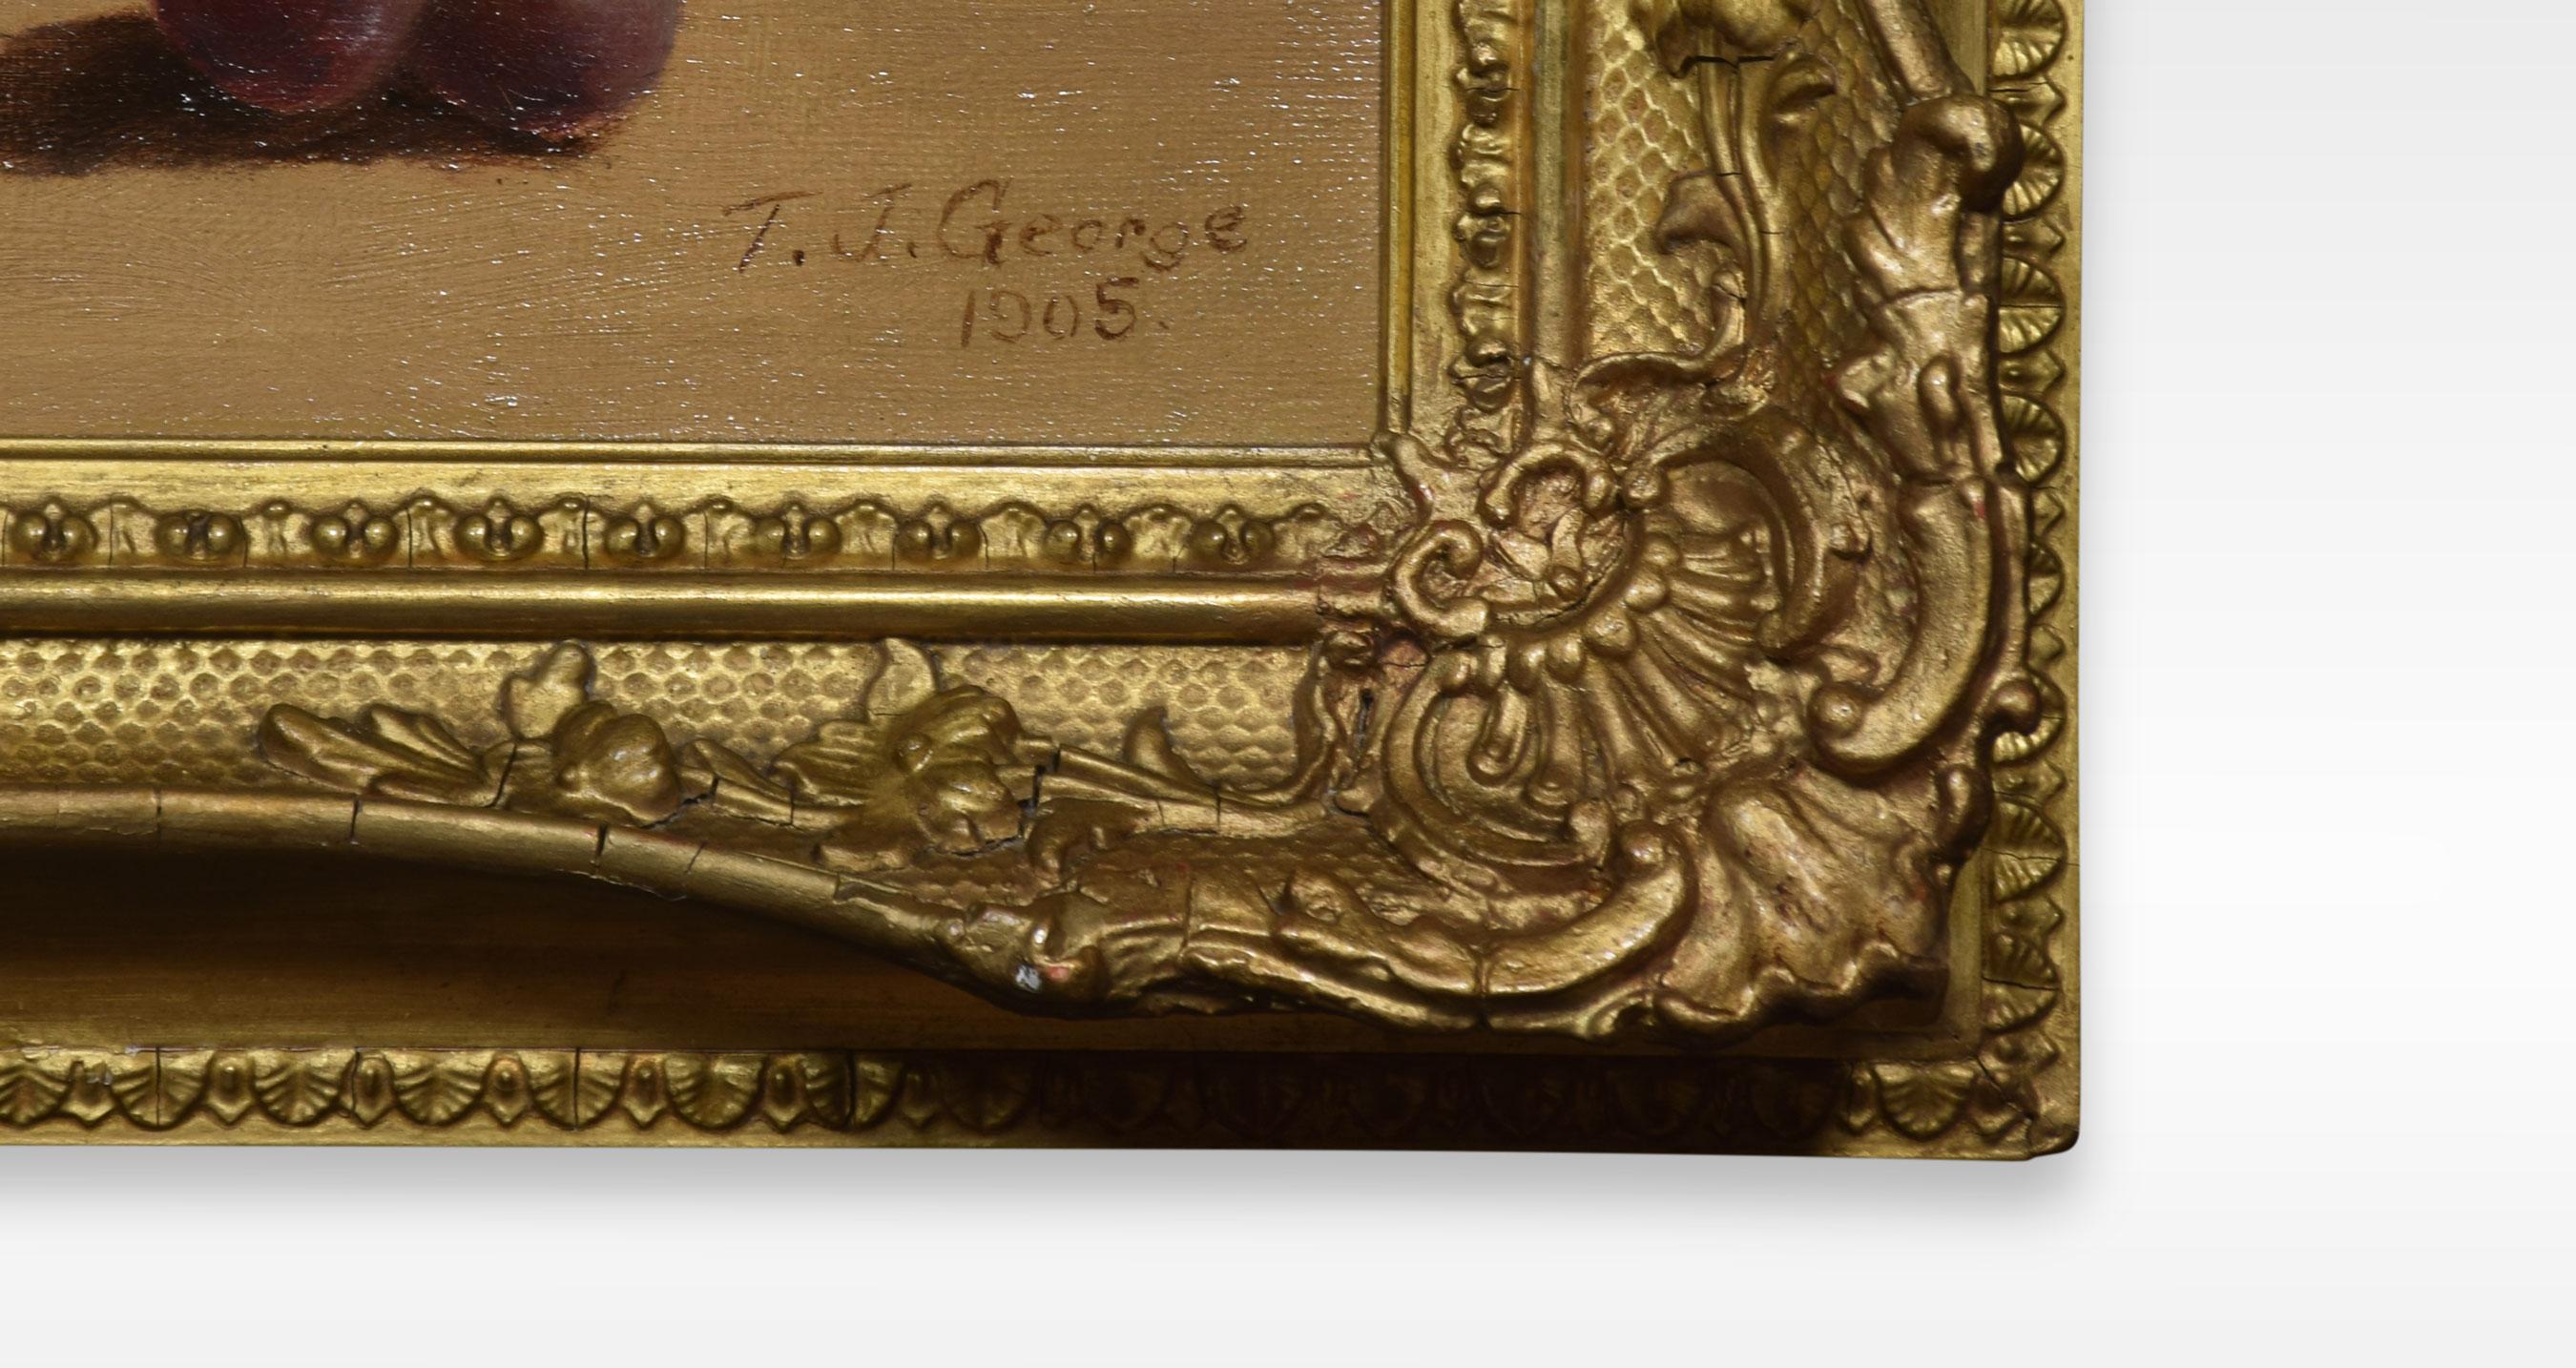 Still life of grapes signed T.J. George, encased in a gilt frame.
Dimensions:
Height 16.5 inches
Width 24.5 inches
Depth 2 inches.